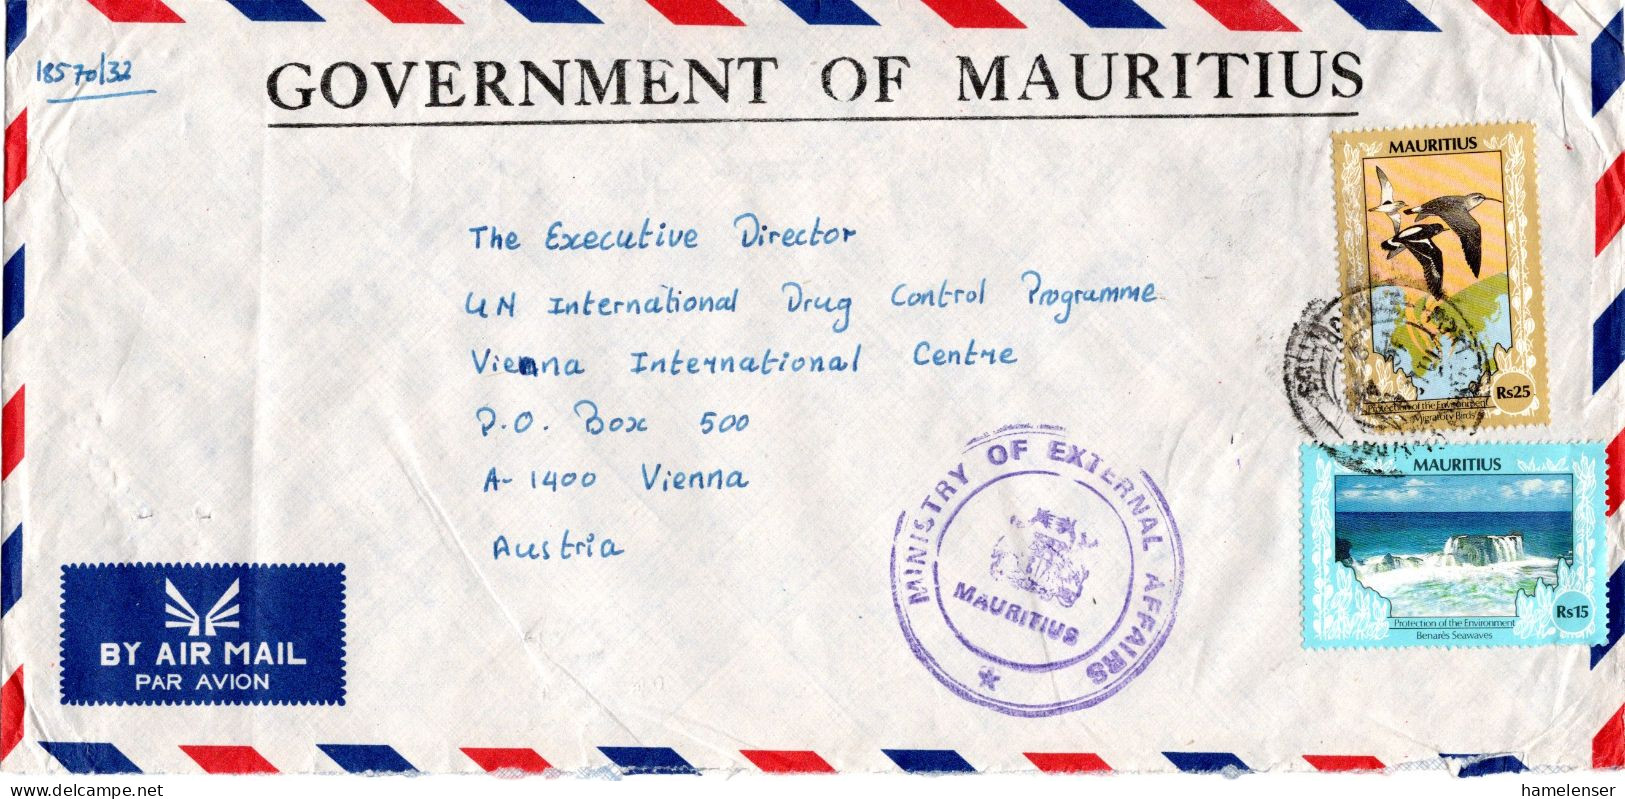 L75567 - Mauritius - 1997 - Rs.25 Zugvoegel (Mgl) MiF A DienstLpBf PORT LOUIS -> UNO Wien - Mauritius (1968-...)